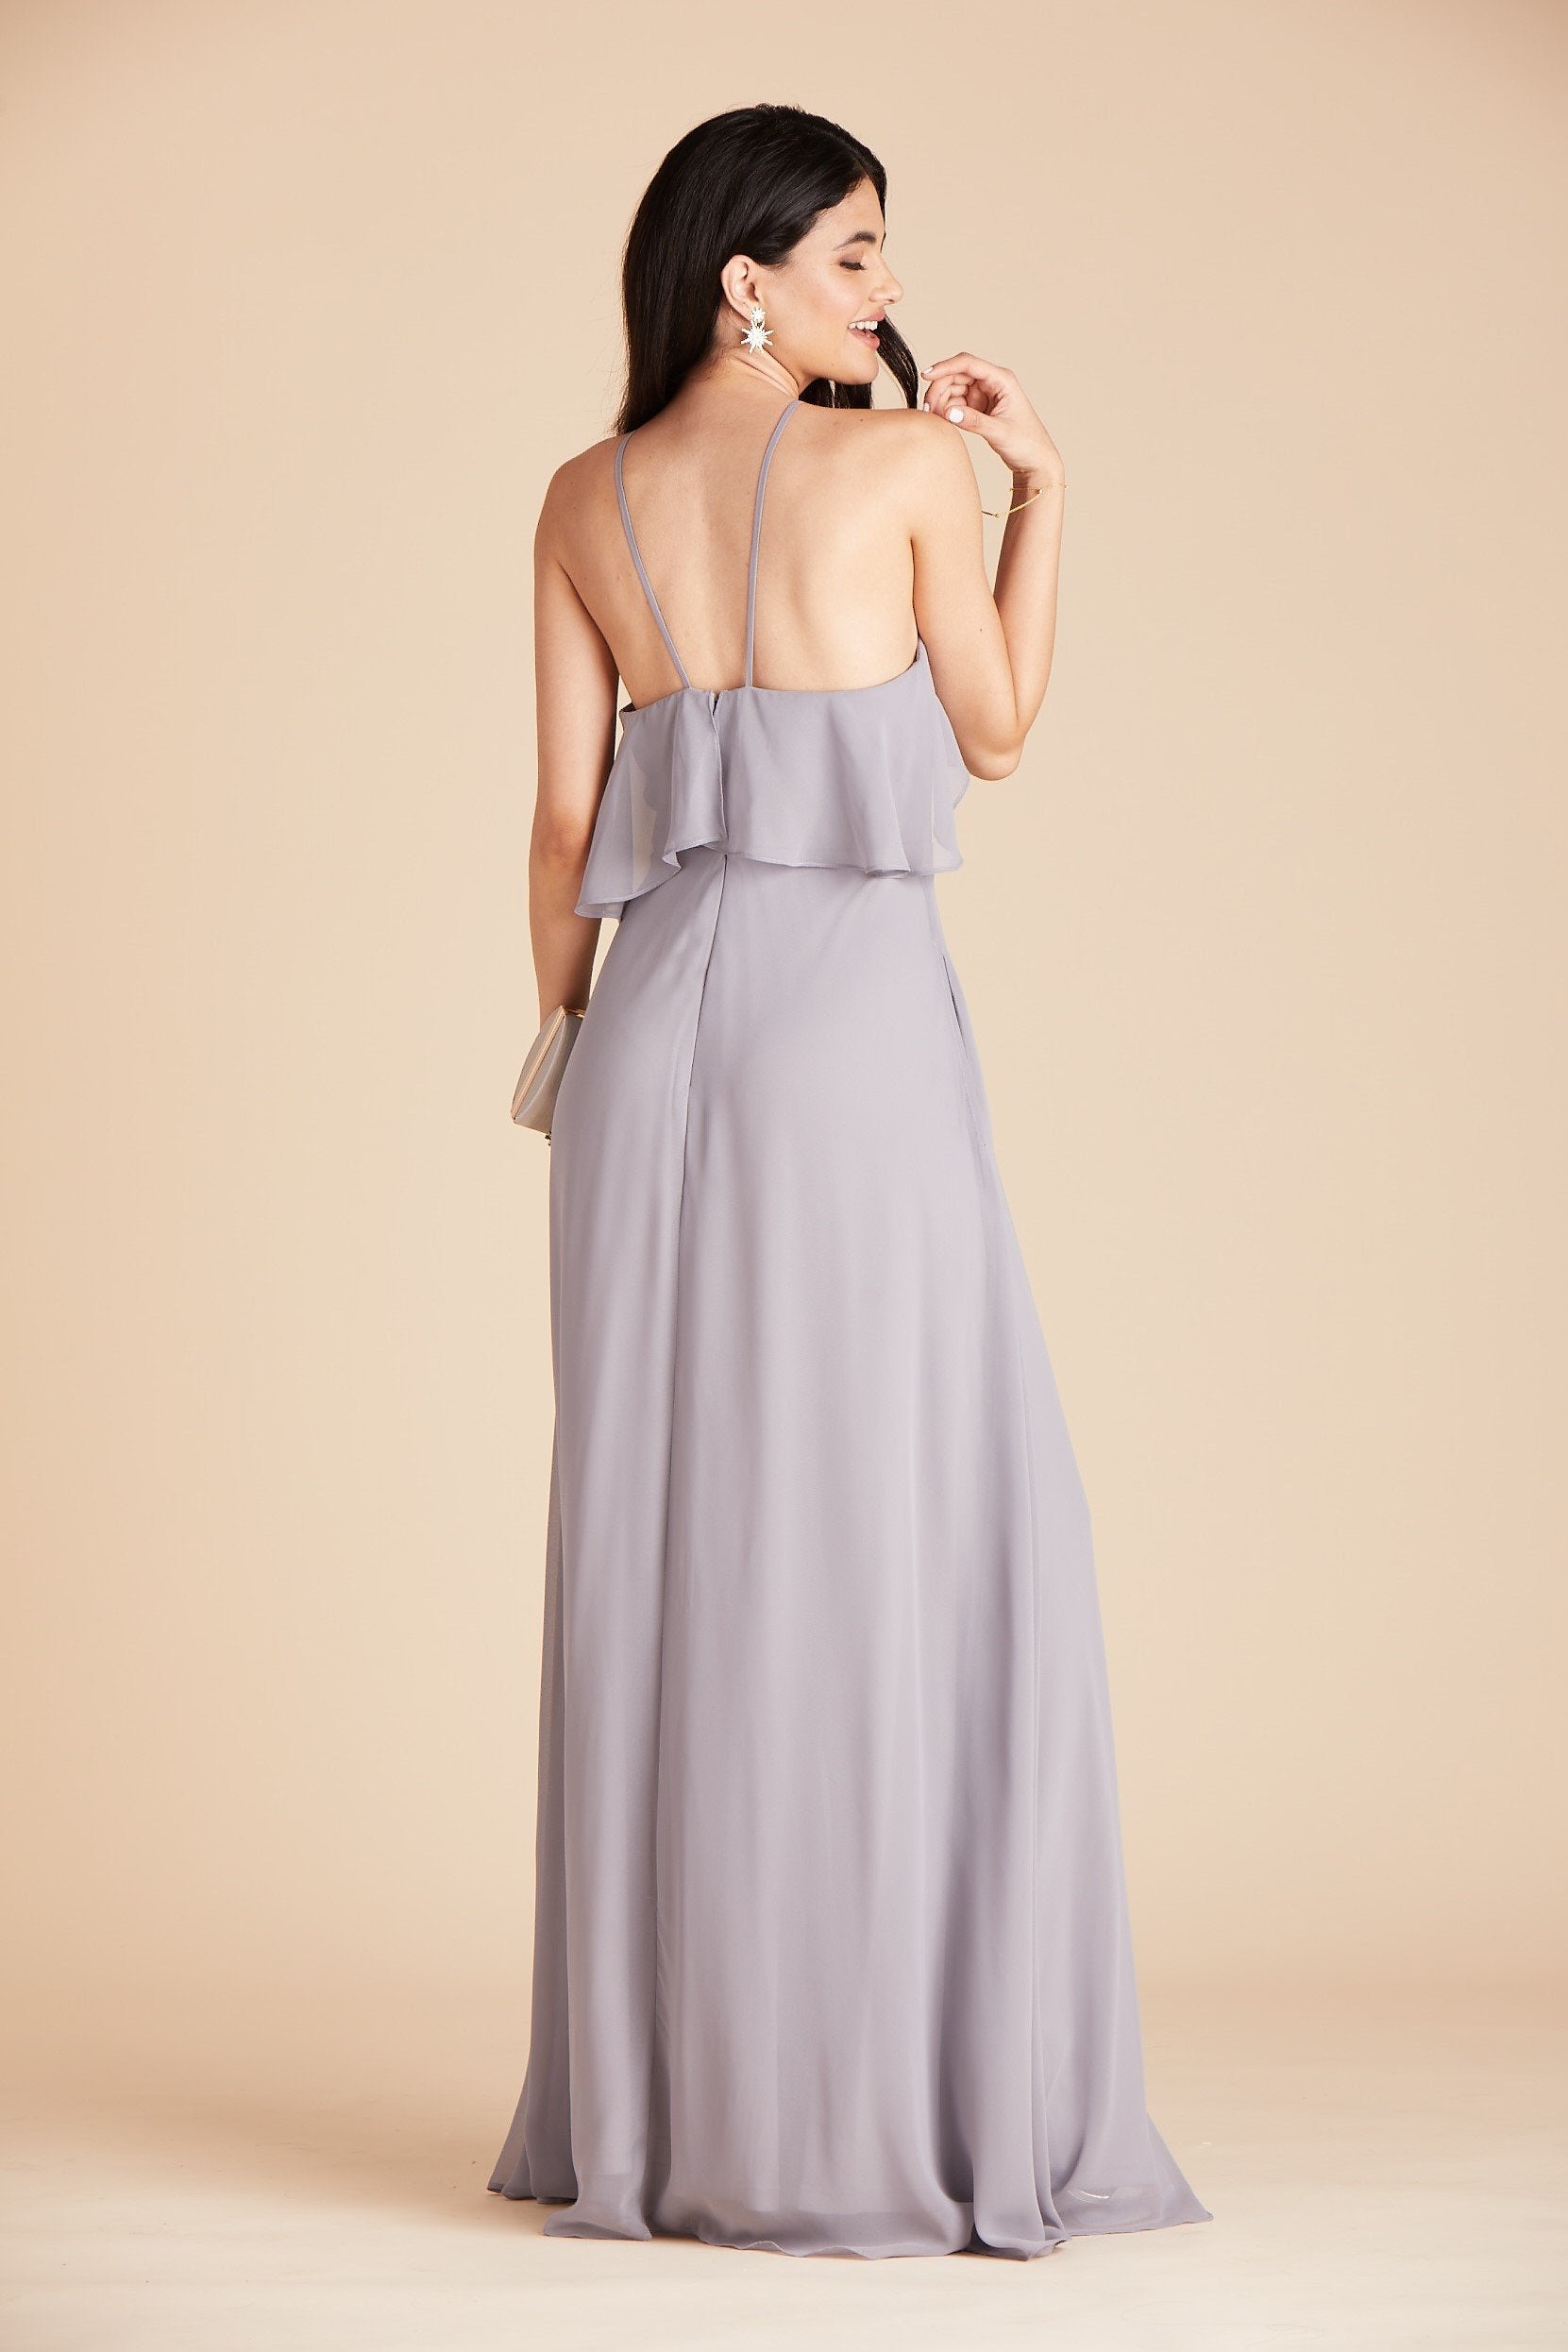 Jules bridesmaid dress in silver chiffon by Birdy Grey, back view